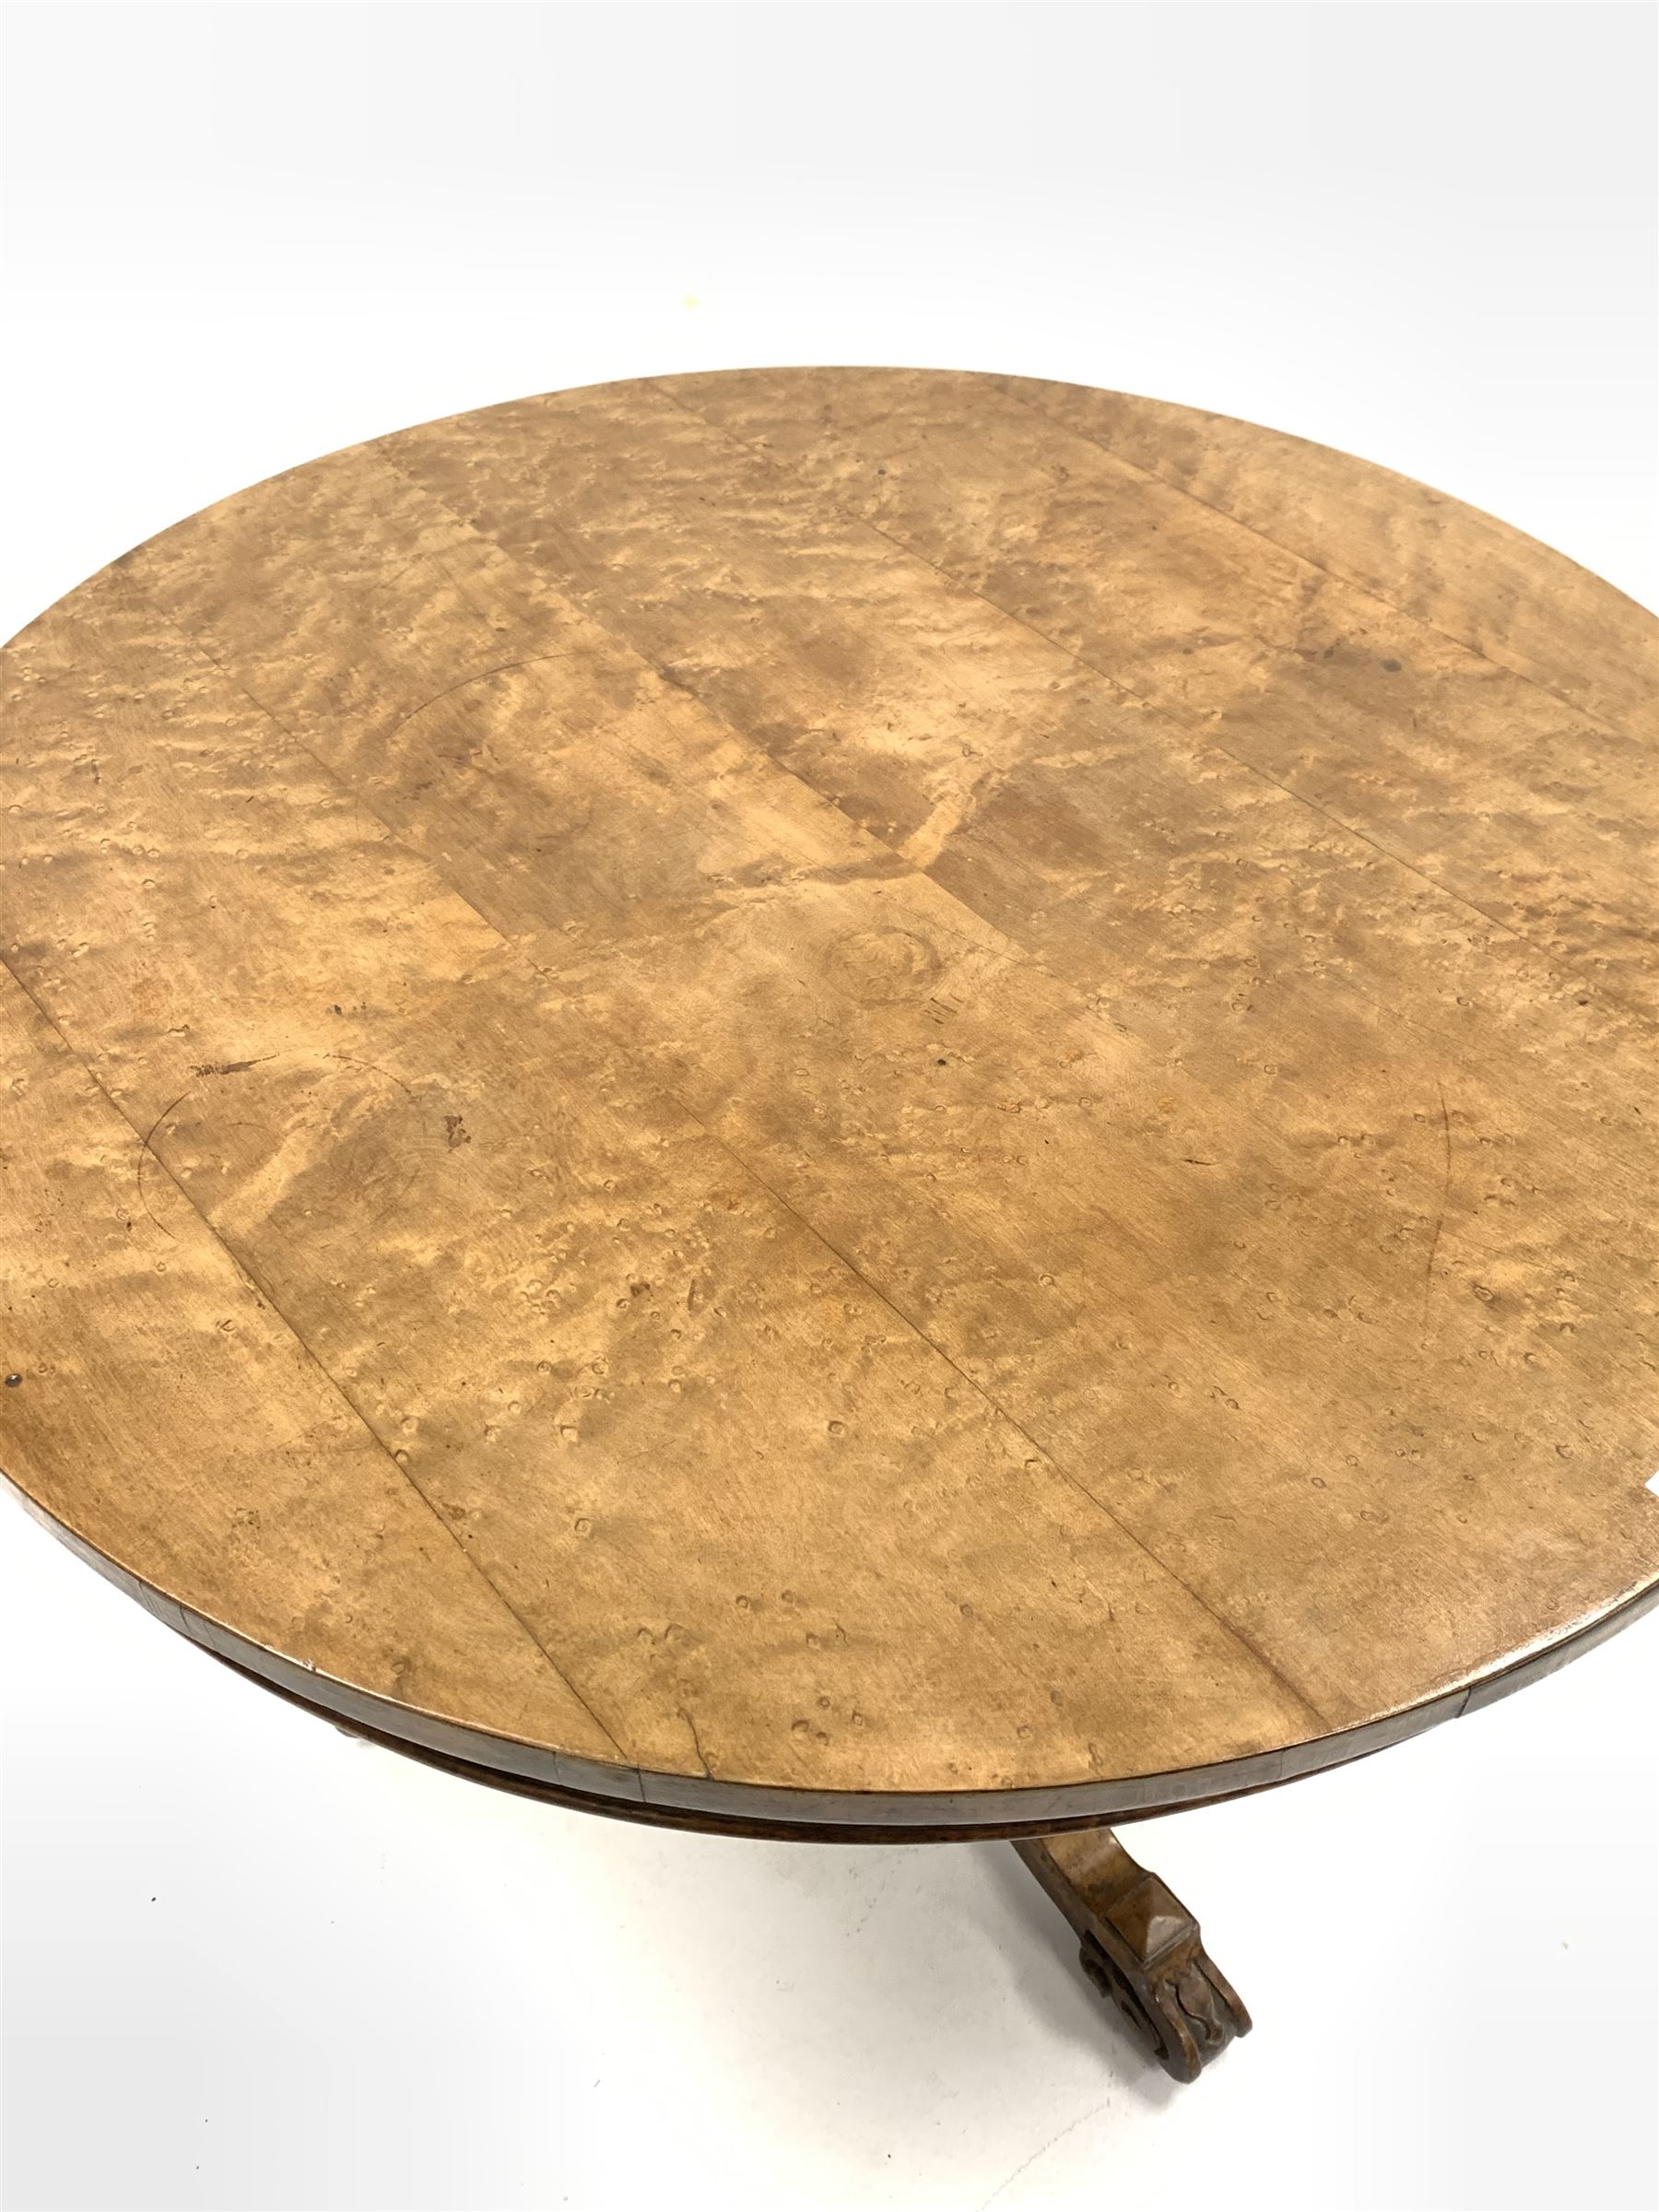 Victorian maple tilt top table by 'Chindley & Sons' - Image 2 of 6